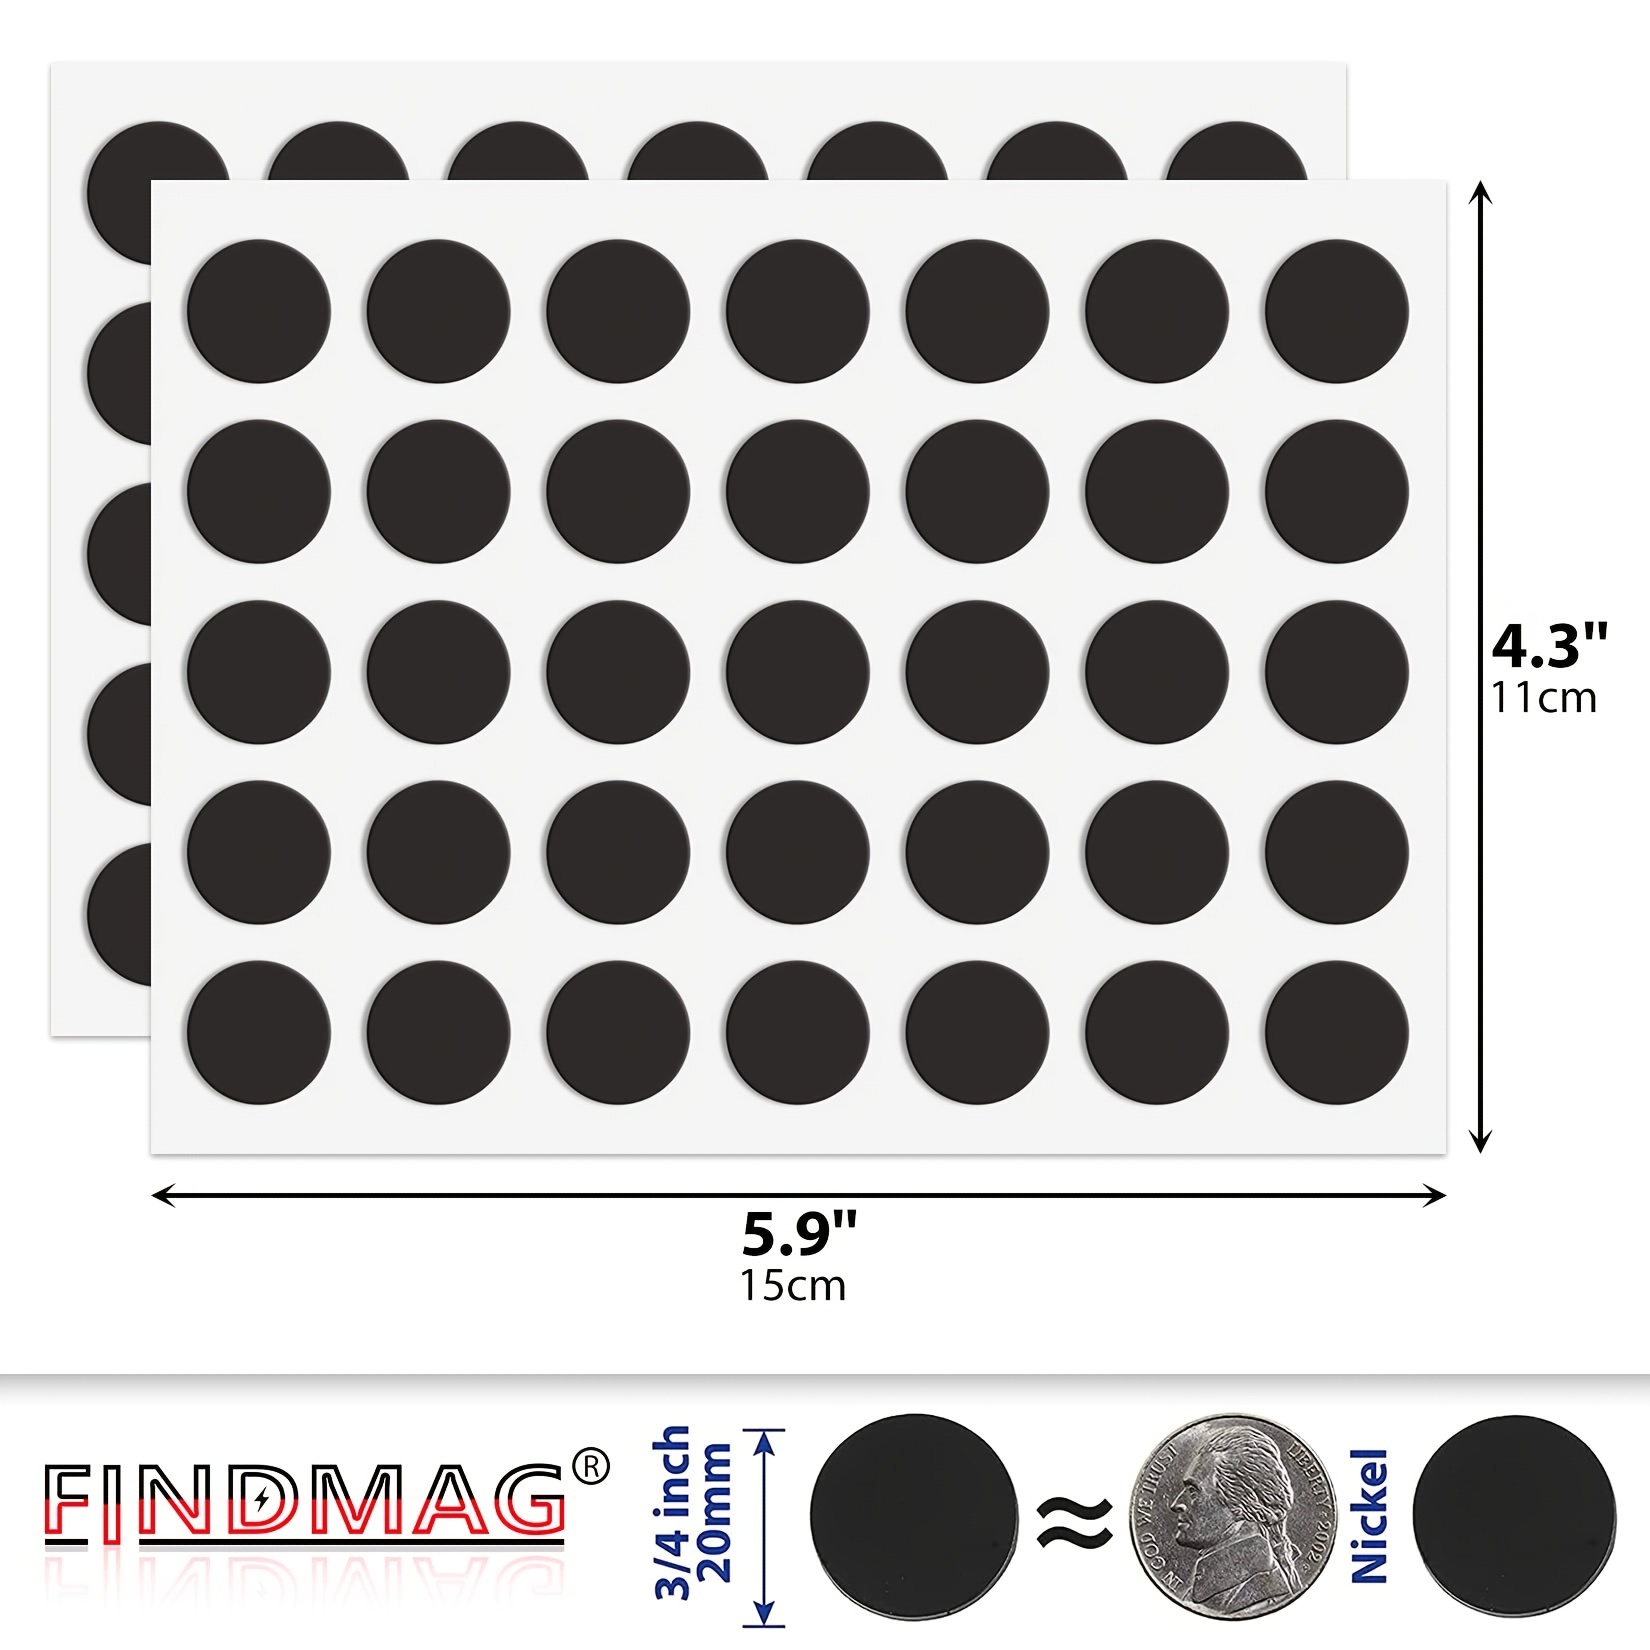  Round Magnets with Adhesive Backing - 120 PCs